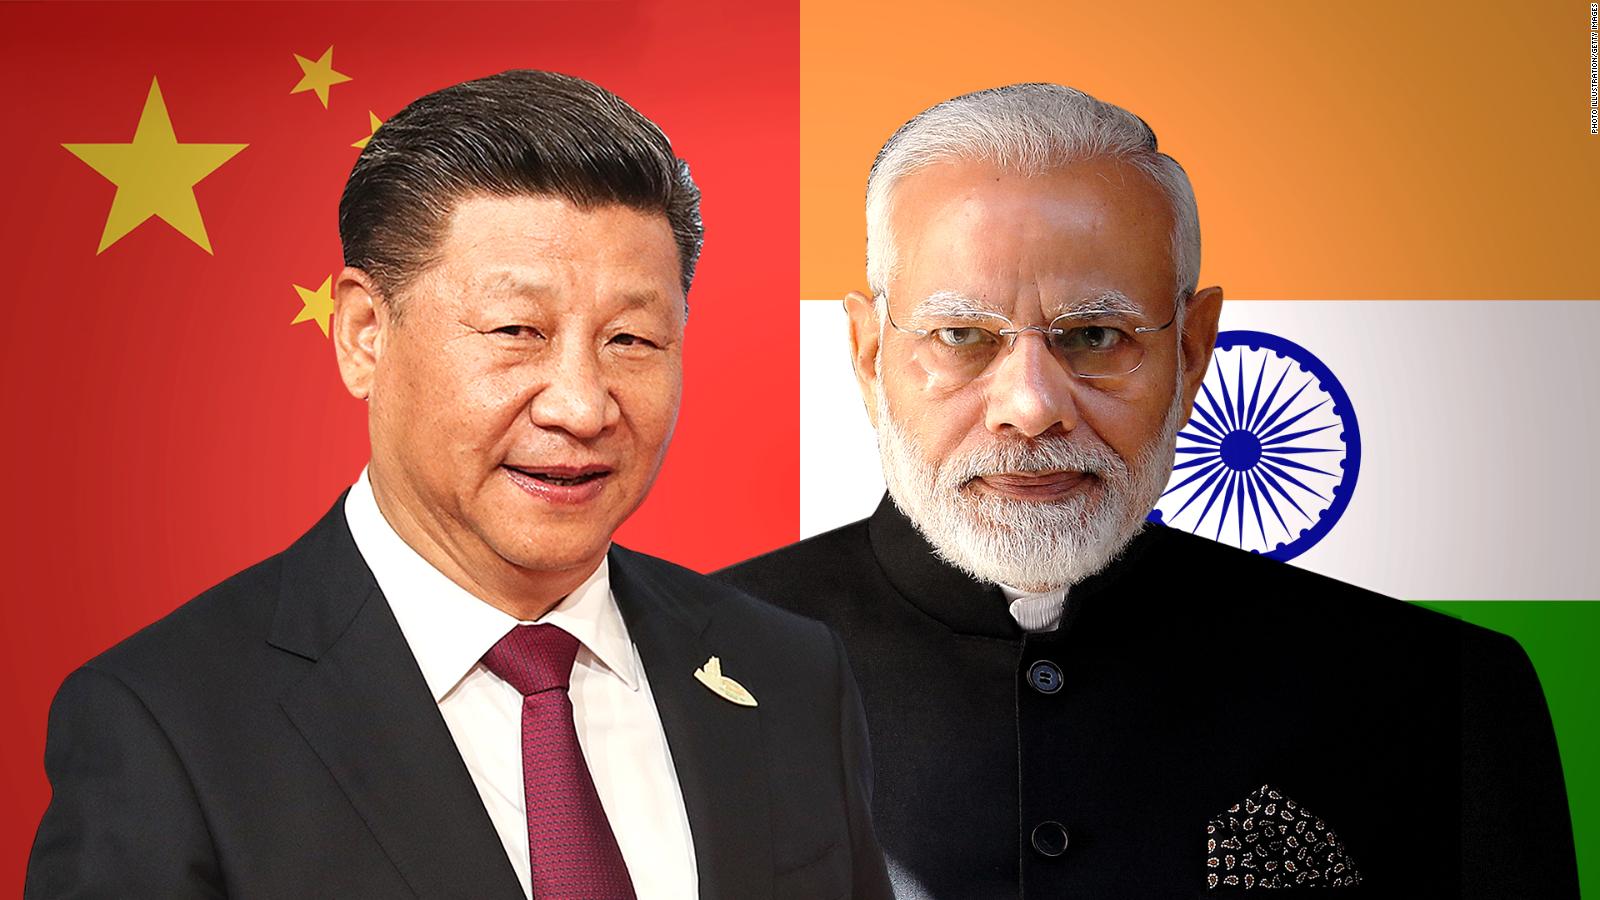 Read more about the article Arunachal Pradesh: PM Modi’s Firm Stance Against China’s Claims